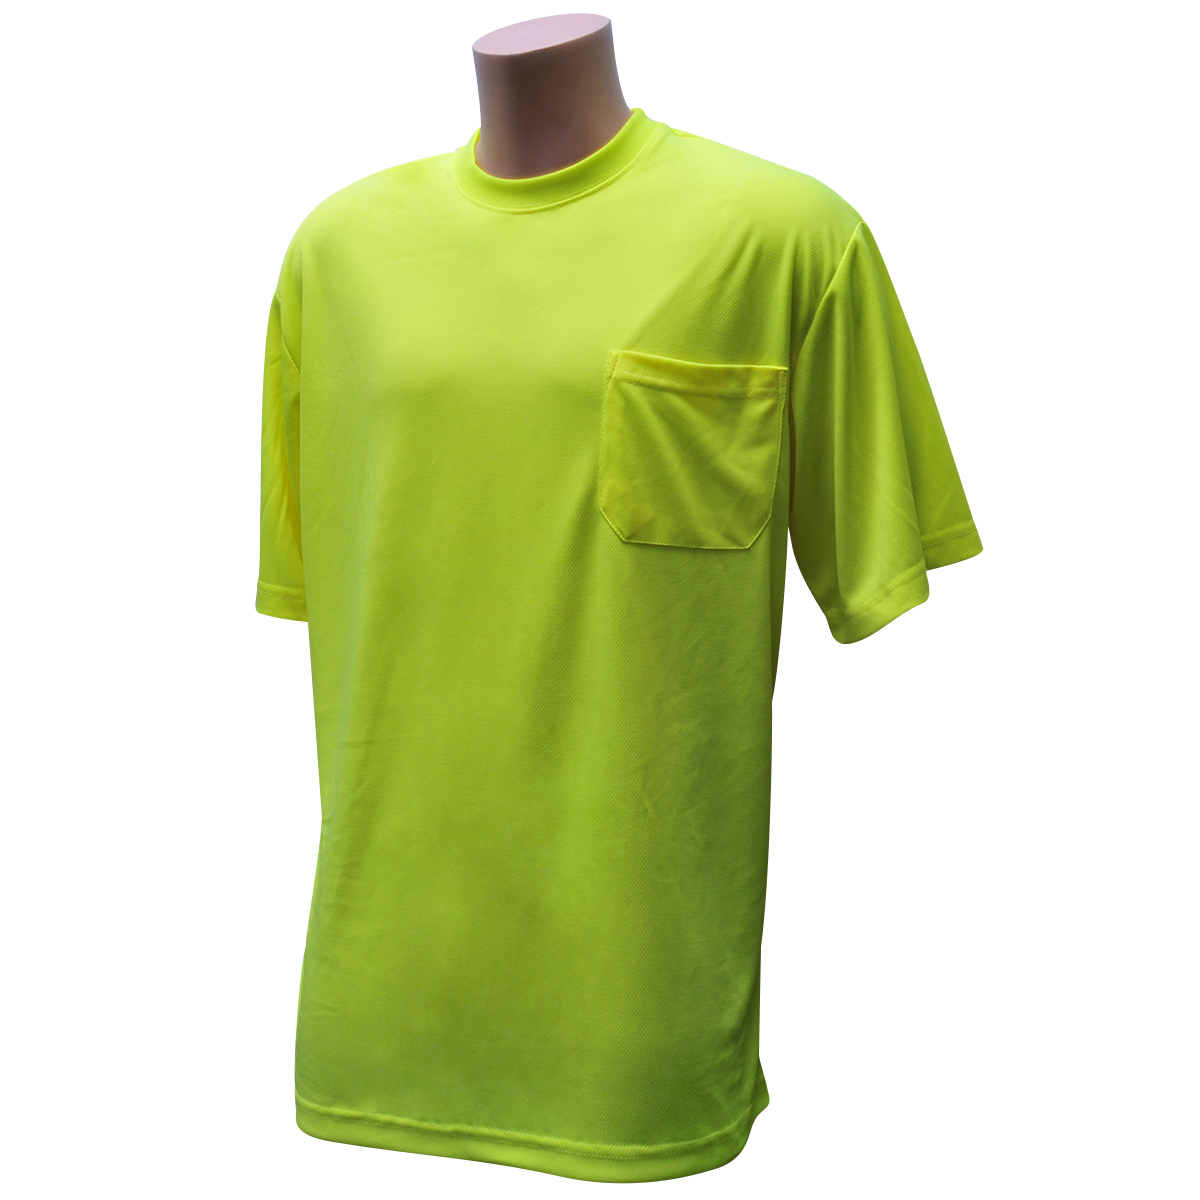 BlackCanyon Outfitters Non Rated Short Sleeve Pocket T-Shirt Lime Green BCOSSTYL Brightly Colored Shirt Fast-Dry Fabric-Large